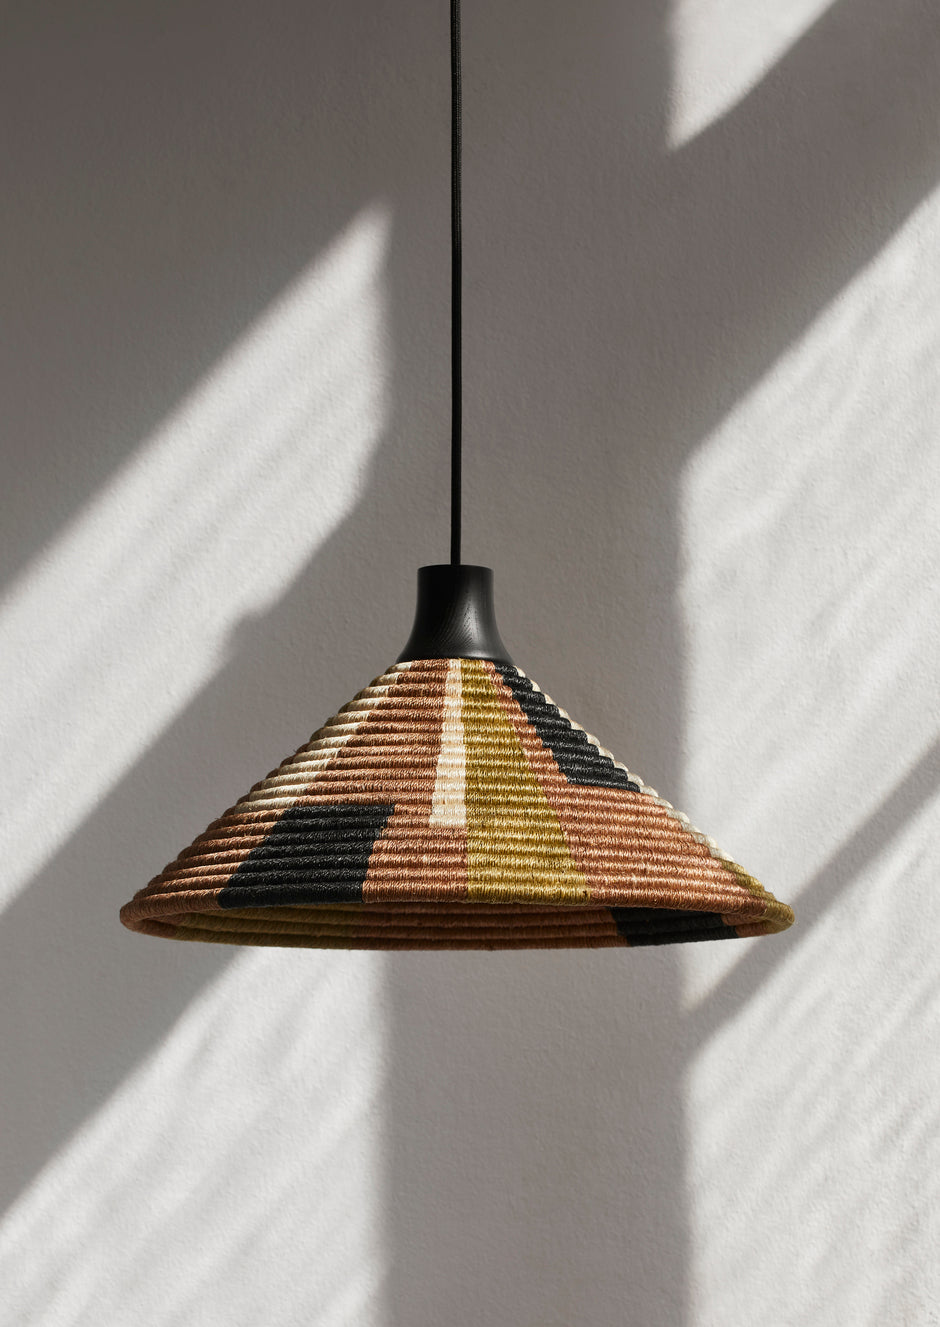 Parrot Small Pendant Light by Forestier